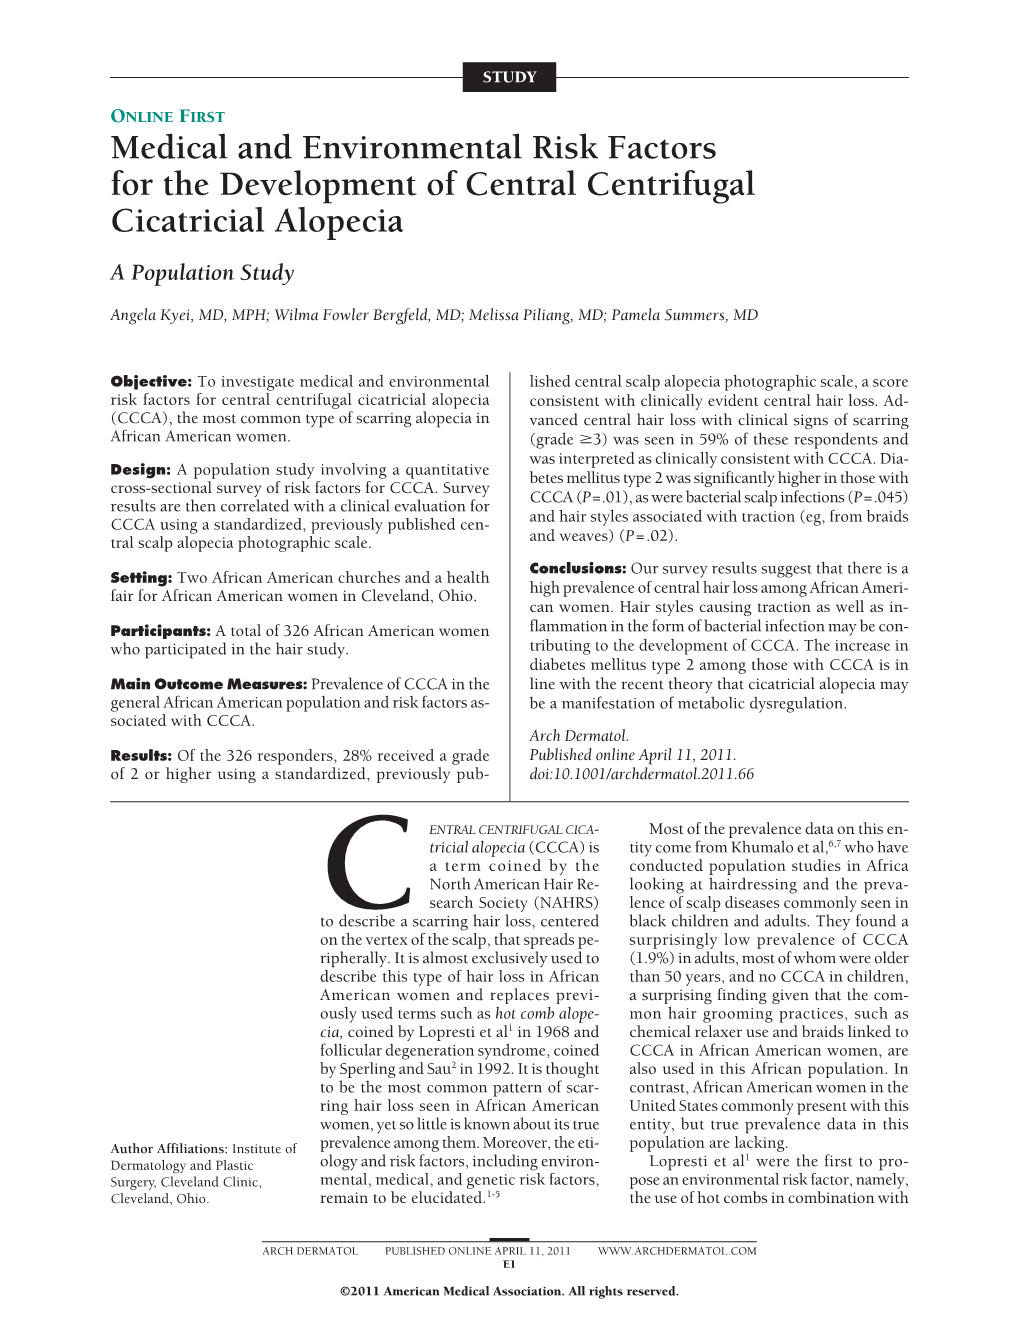 Medical and Environmental Risk Factors for the Development of Central Centrifugal Cicatricial Alopecia a Population Study